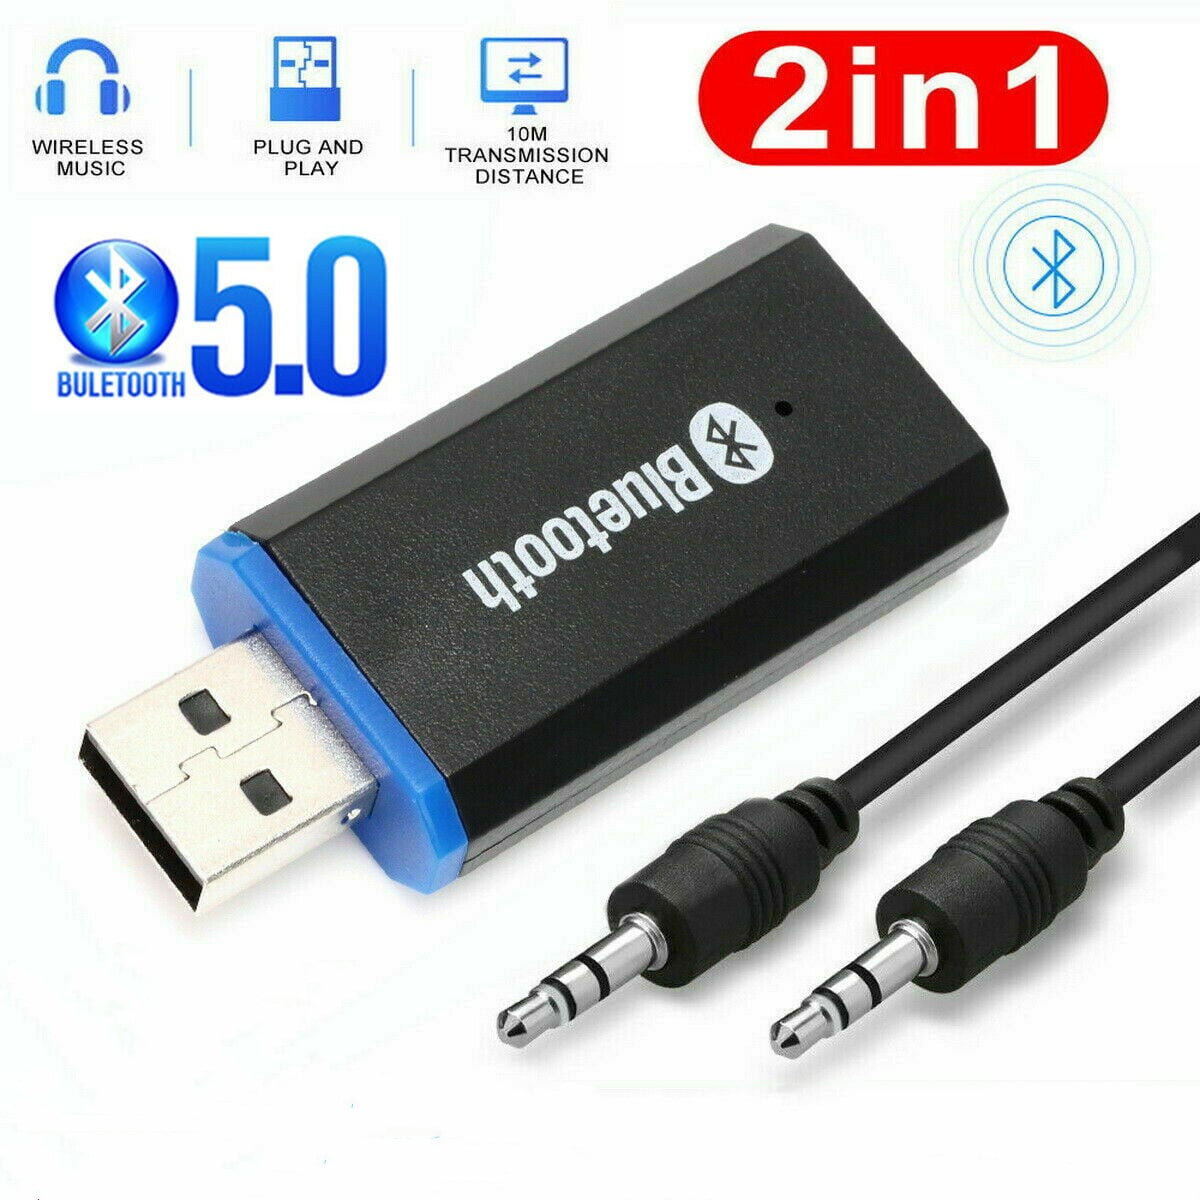 3.5mm Wireless Car USB AUX Receiver Adapter Audio For Home Stereo PC U 